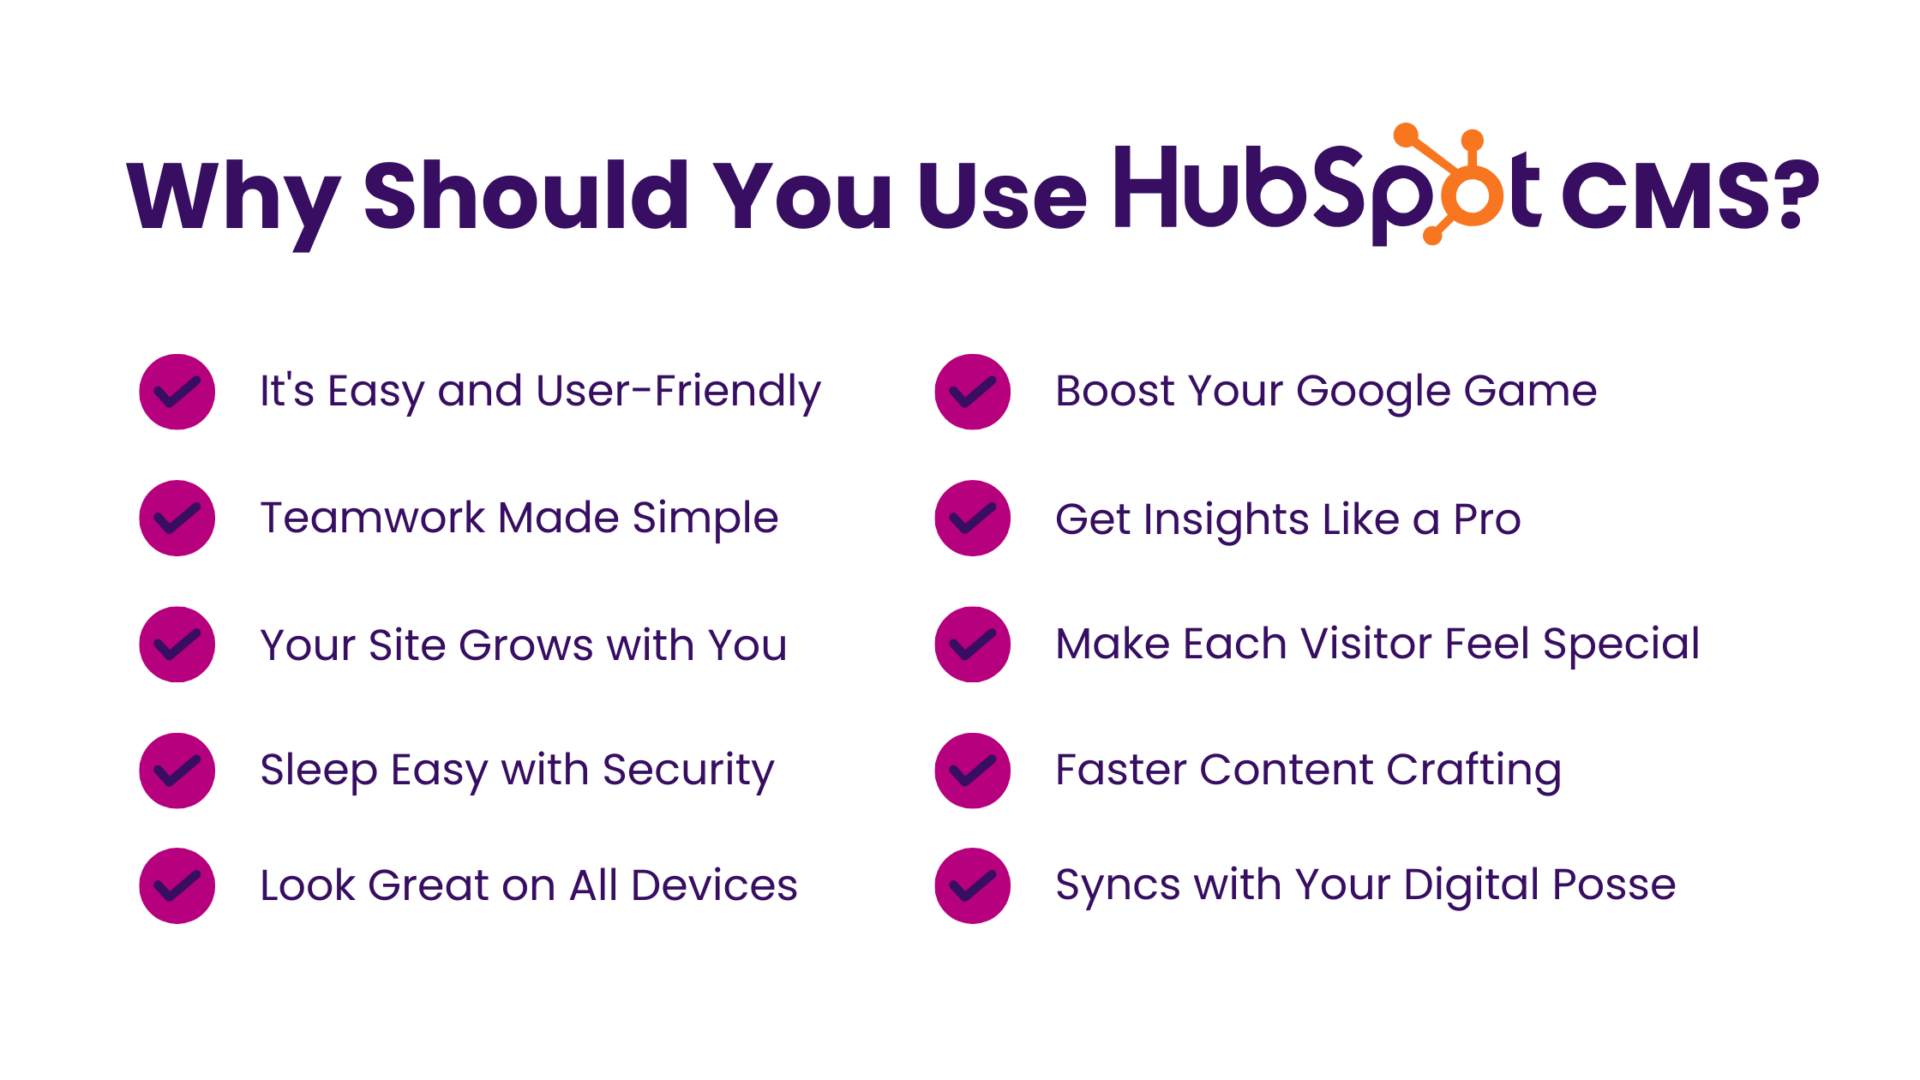 Why Should You Use HubSpot CMS